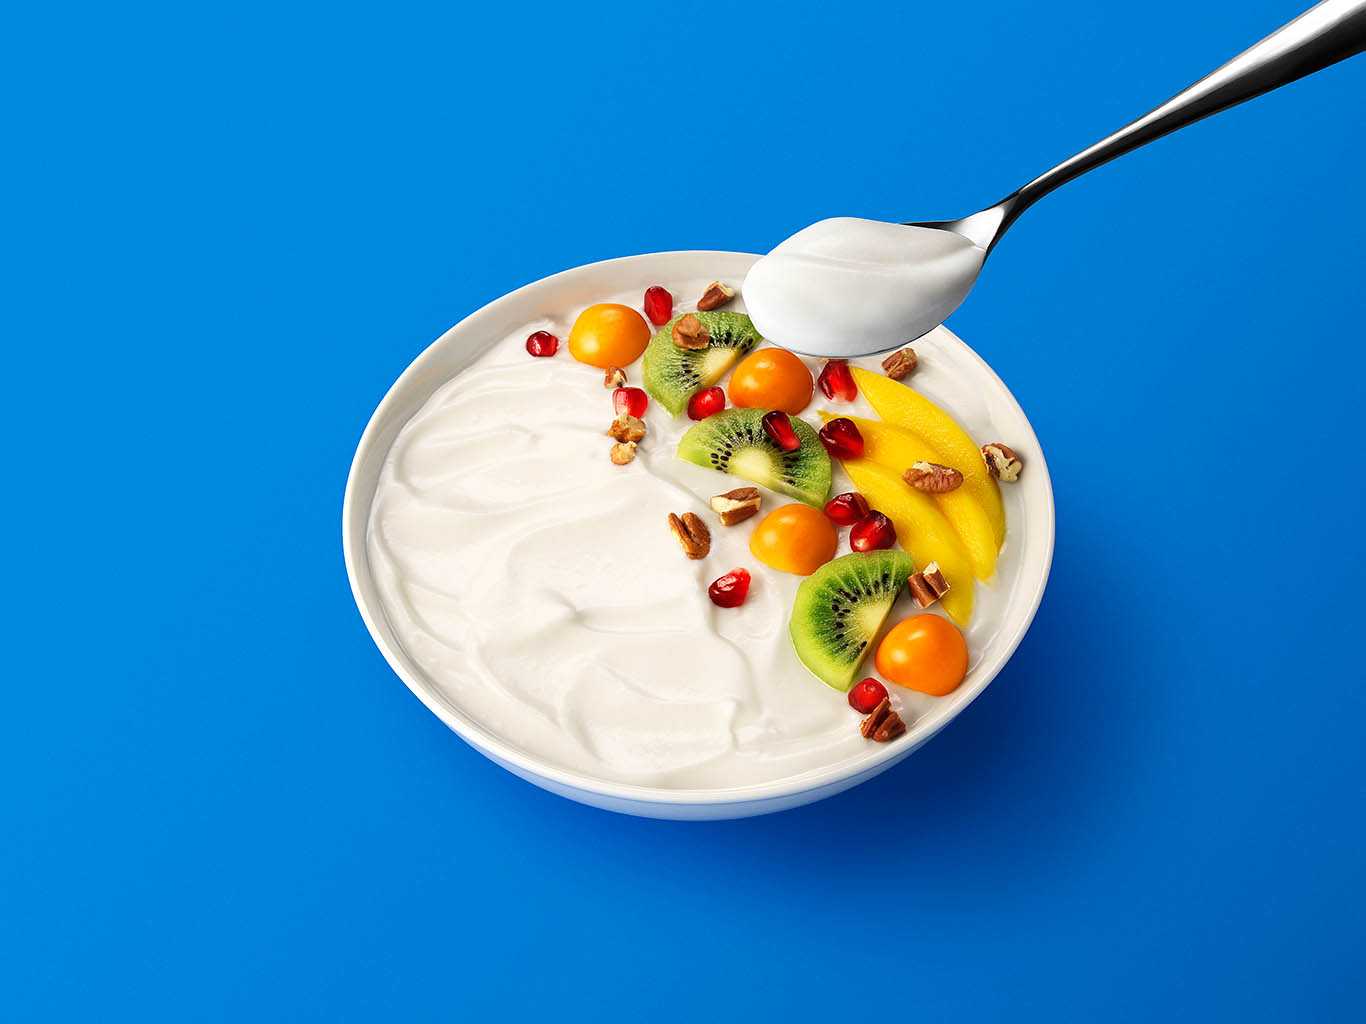 Food Photography of Koko yoghurt bowl with fruits by Packshot Factory